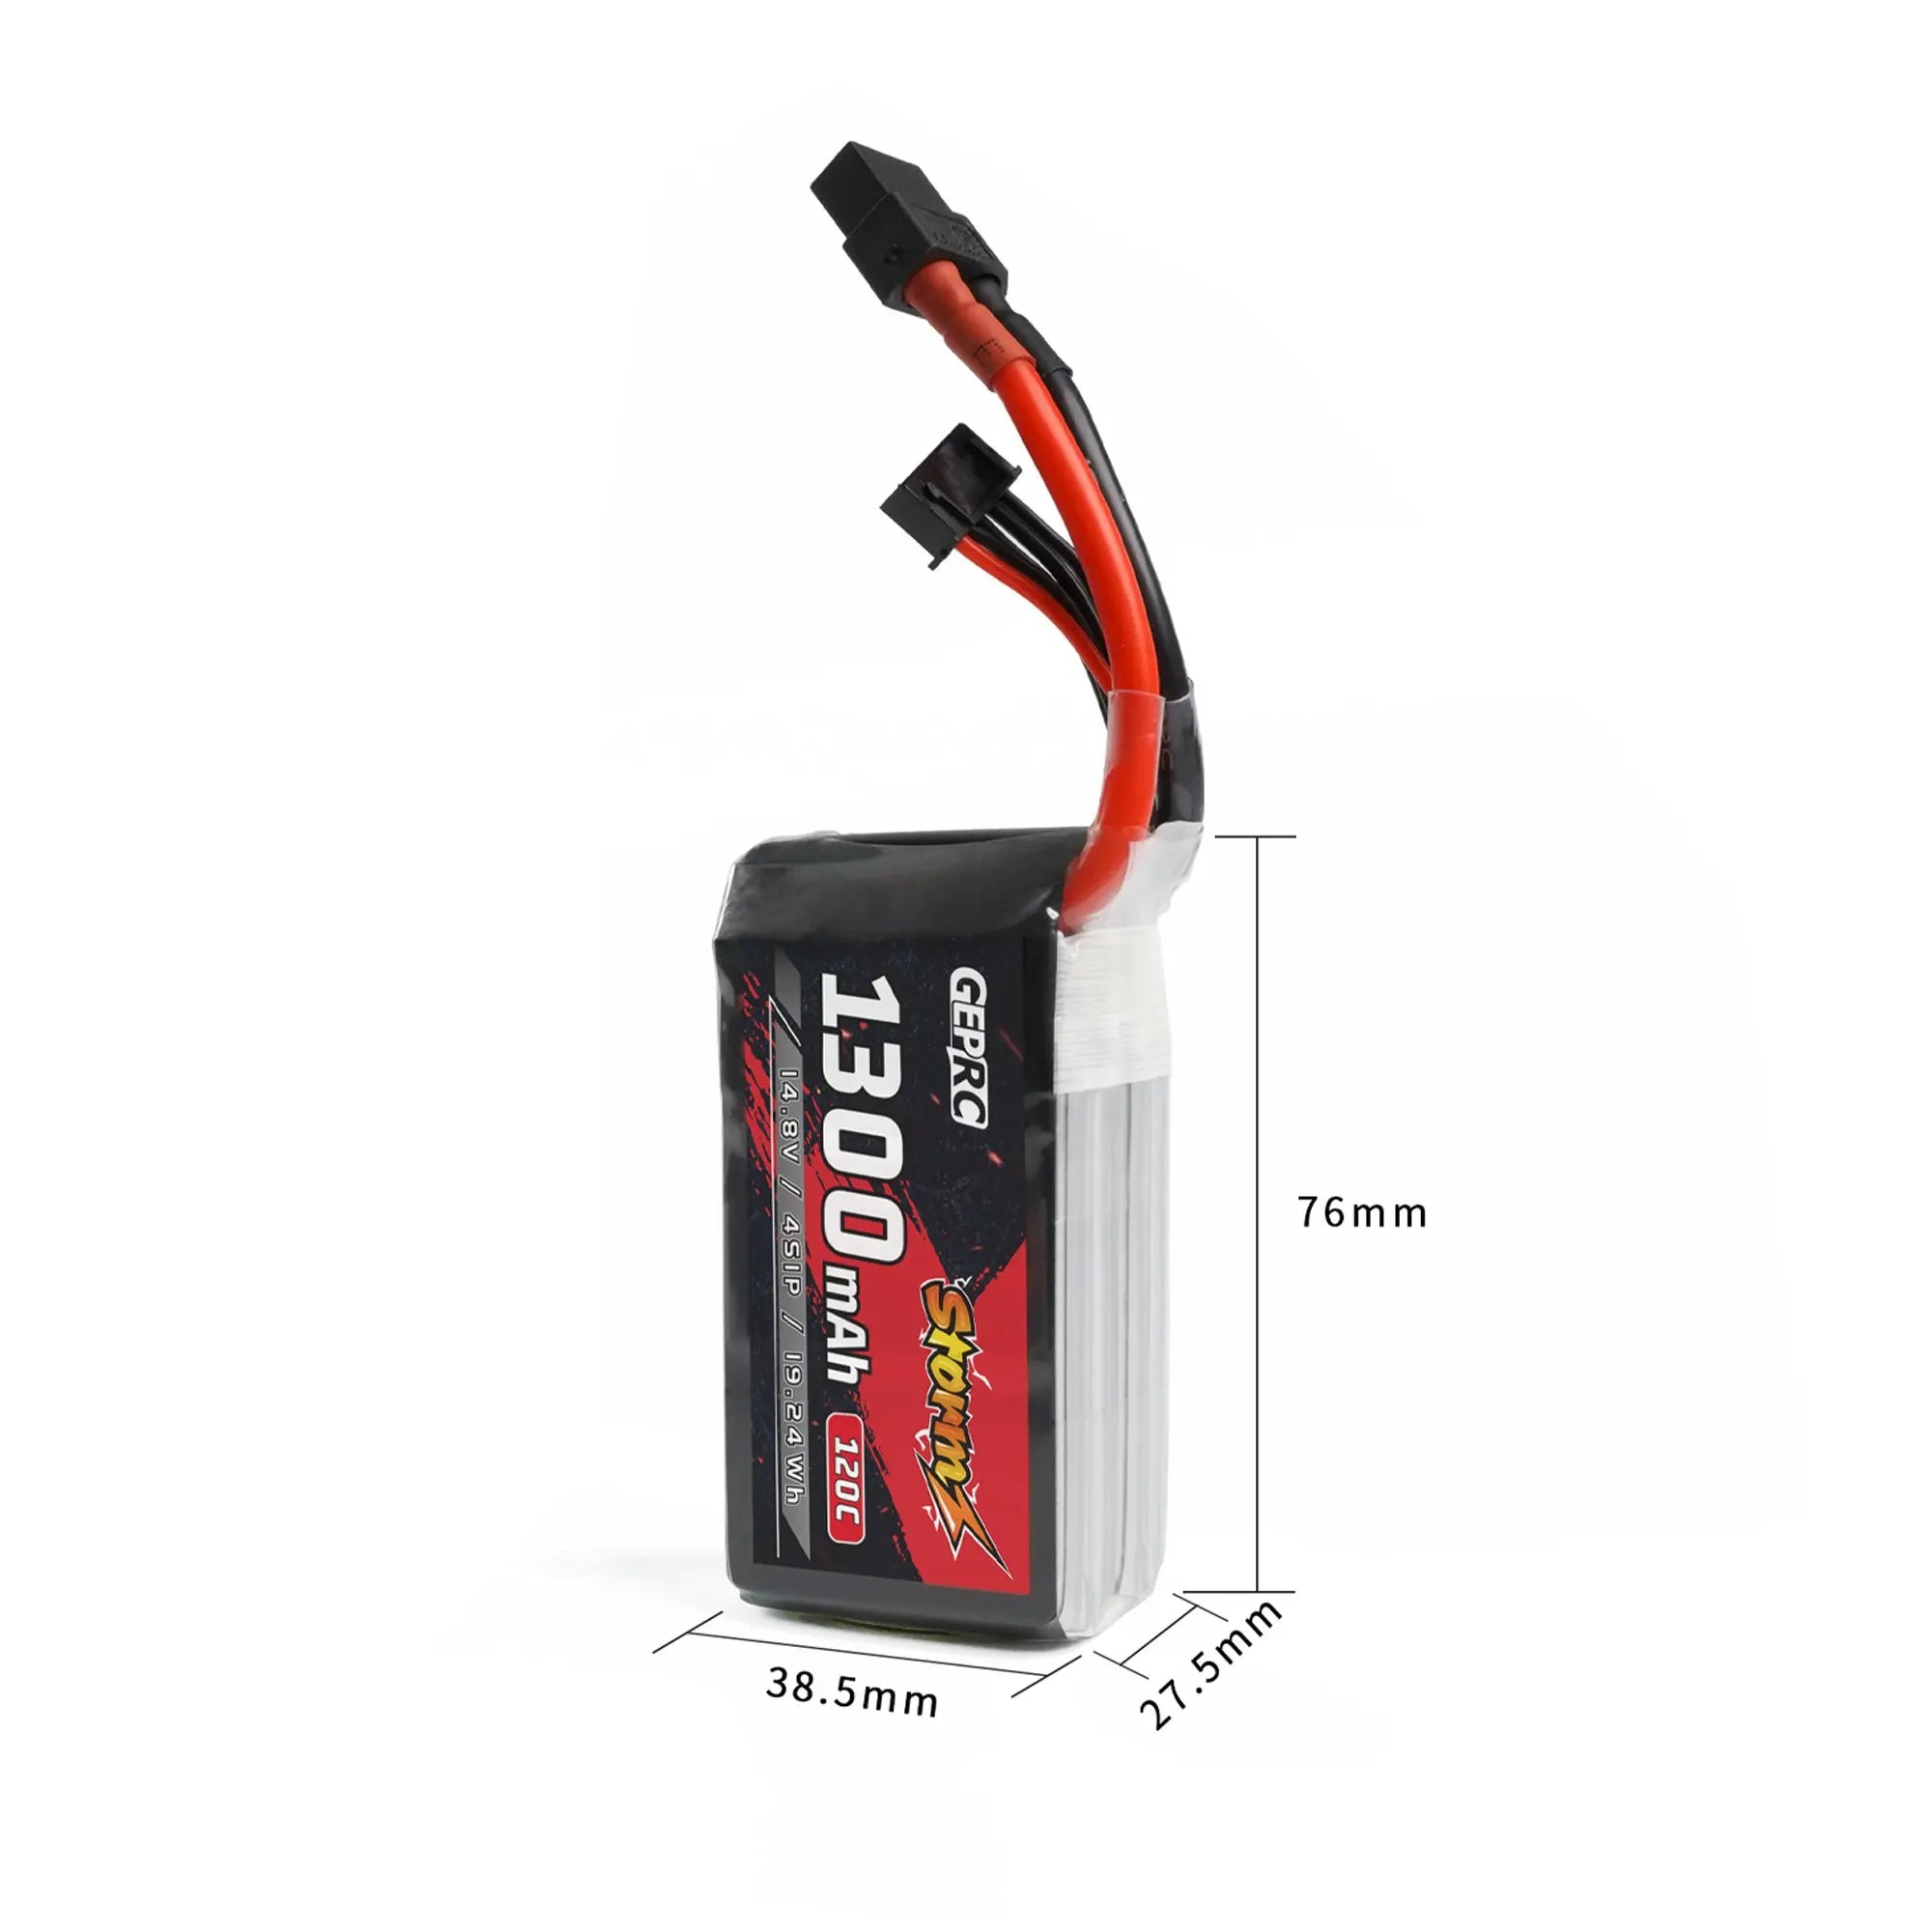 GEPRC Storm 4S 1400mAh 120C Lipo Battery, Q: What is the appropriate charging rate C for the battery